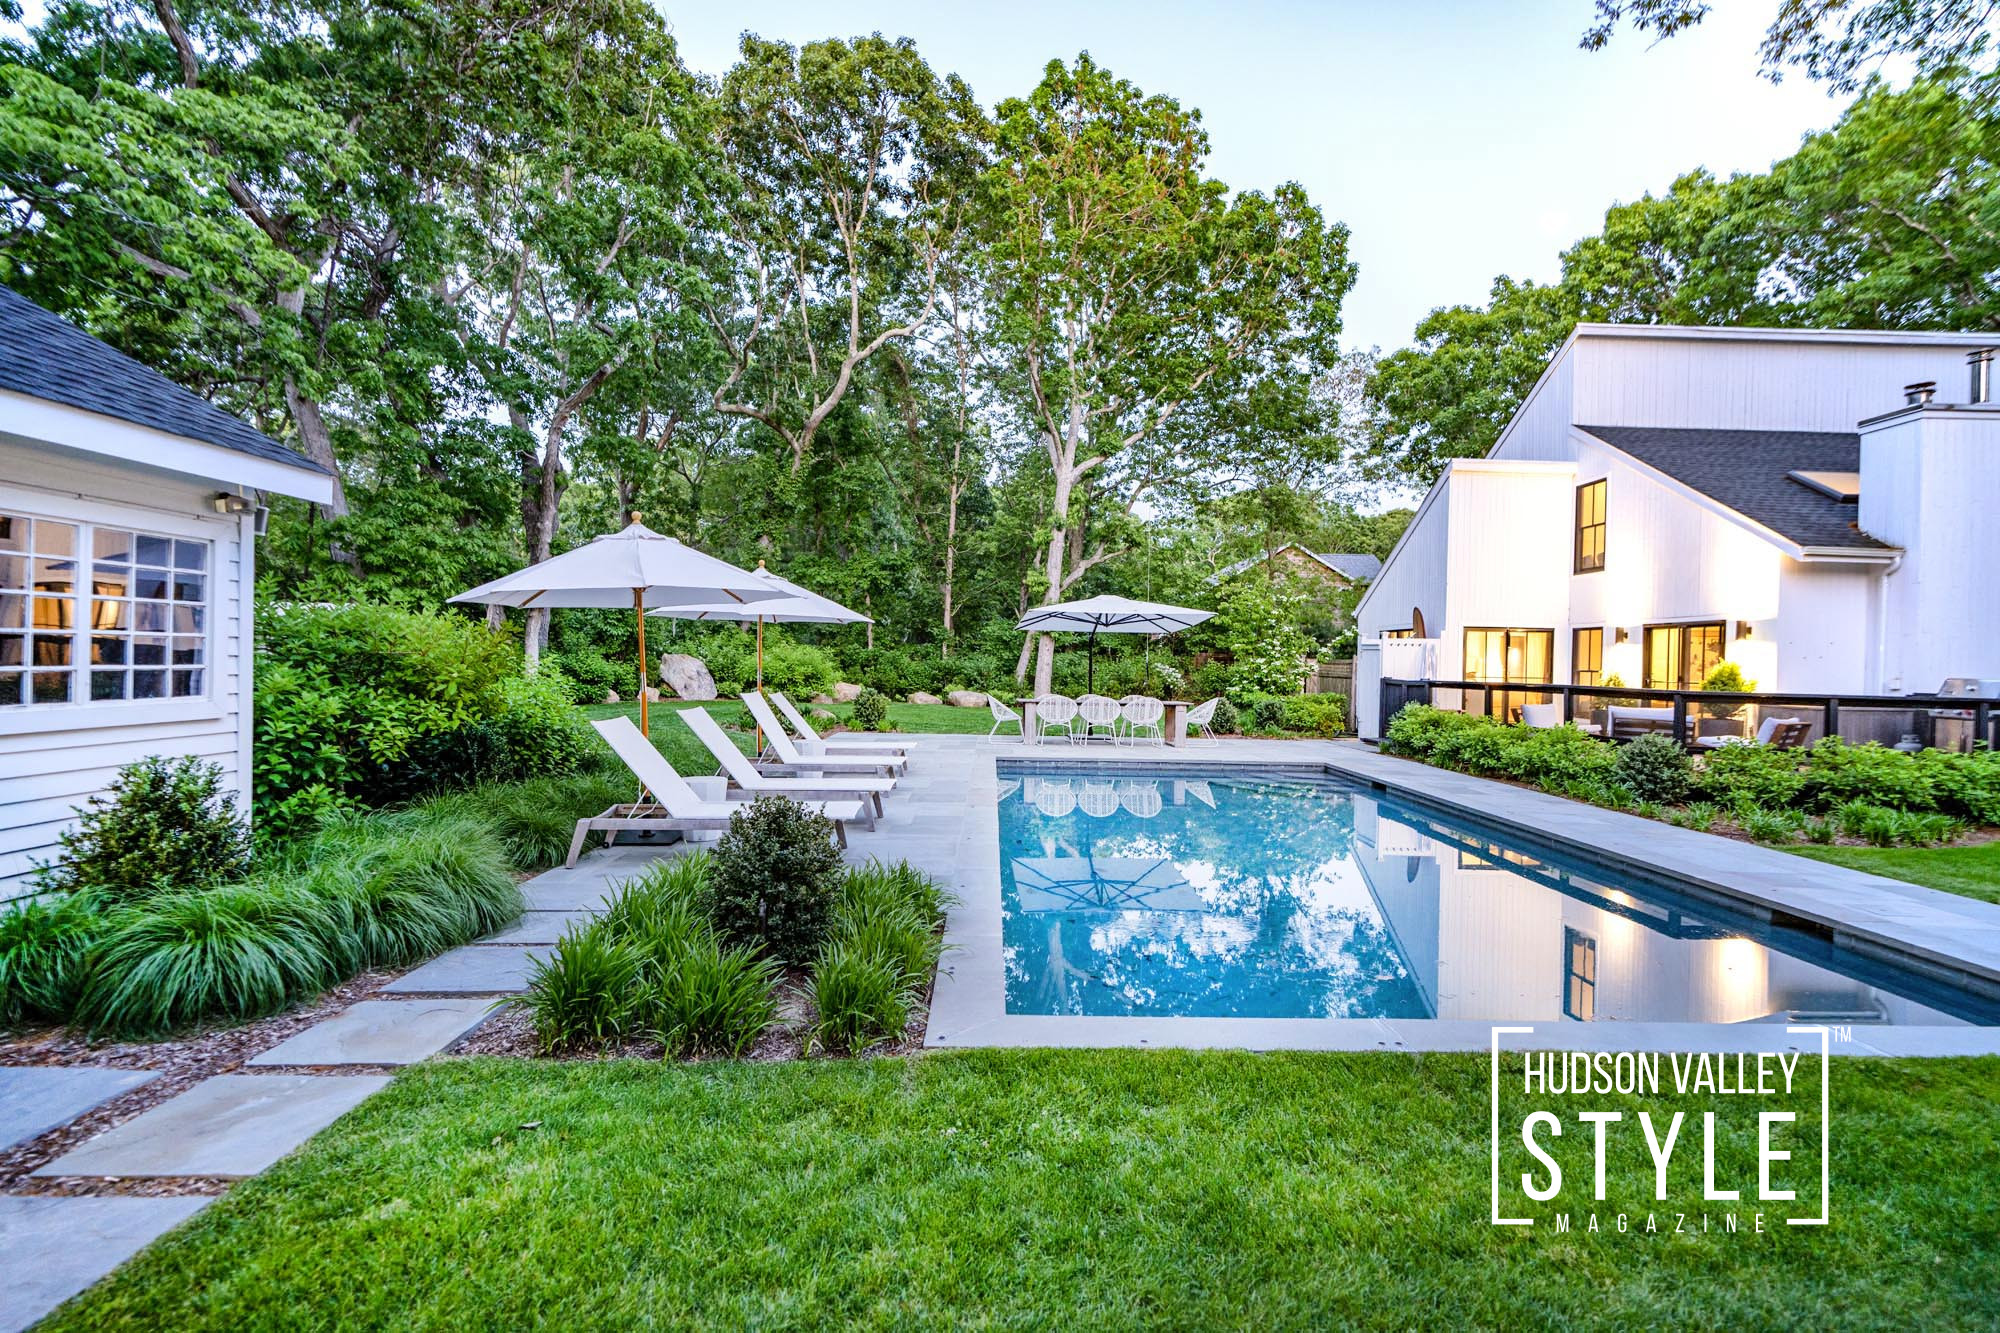 Celestial Seclusion in East Hampton - A Luxury Airbnb Retreat Captured by Renowned Travel Lifestyle Photographer Maxwell Alexander – Presented by Alluvion Media – The Best Airbnb photography in Hudson Valley, NYC, and the Hamptons